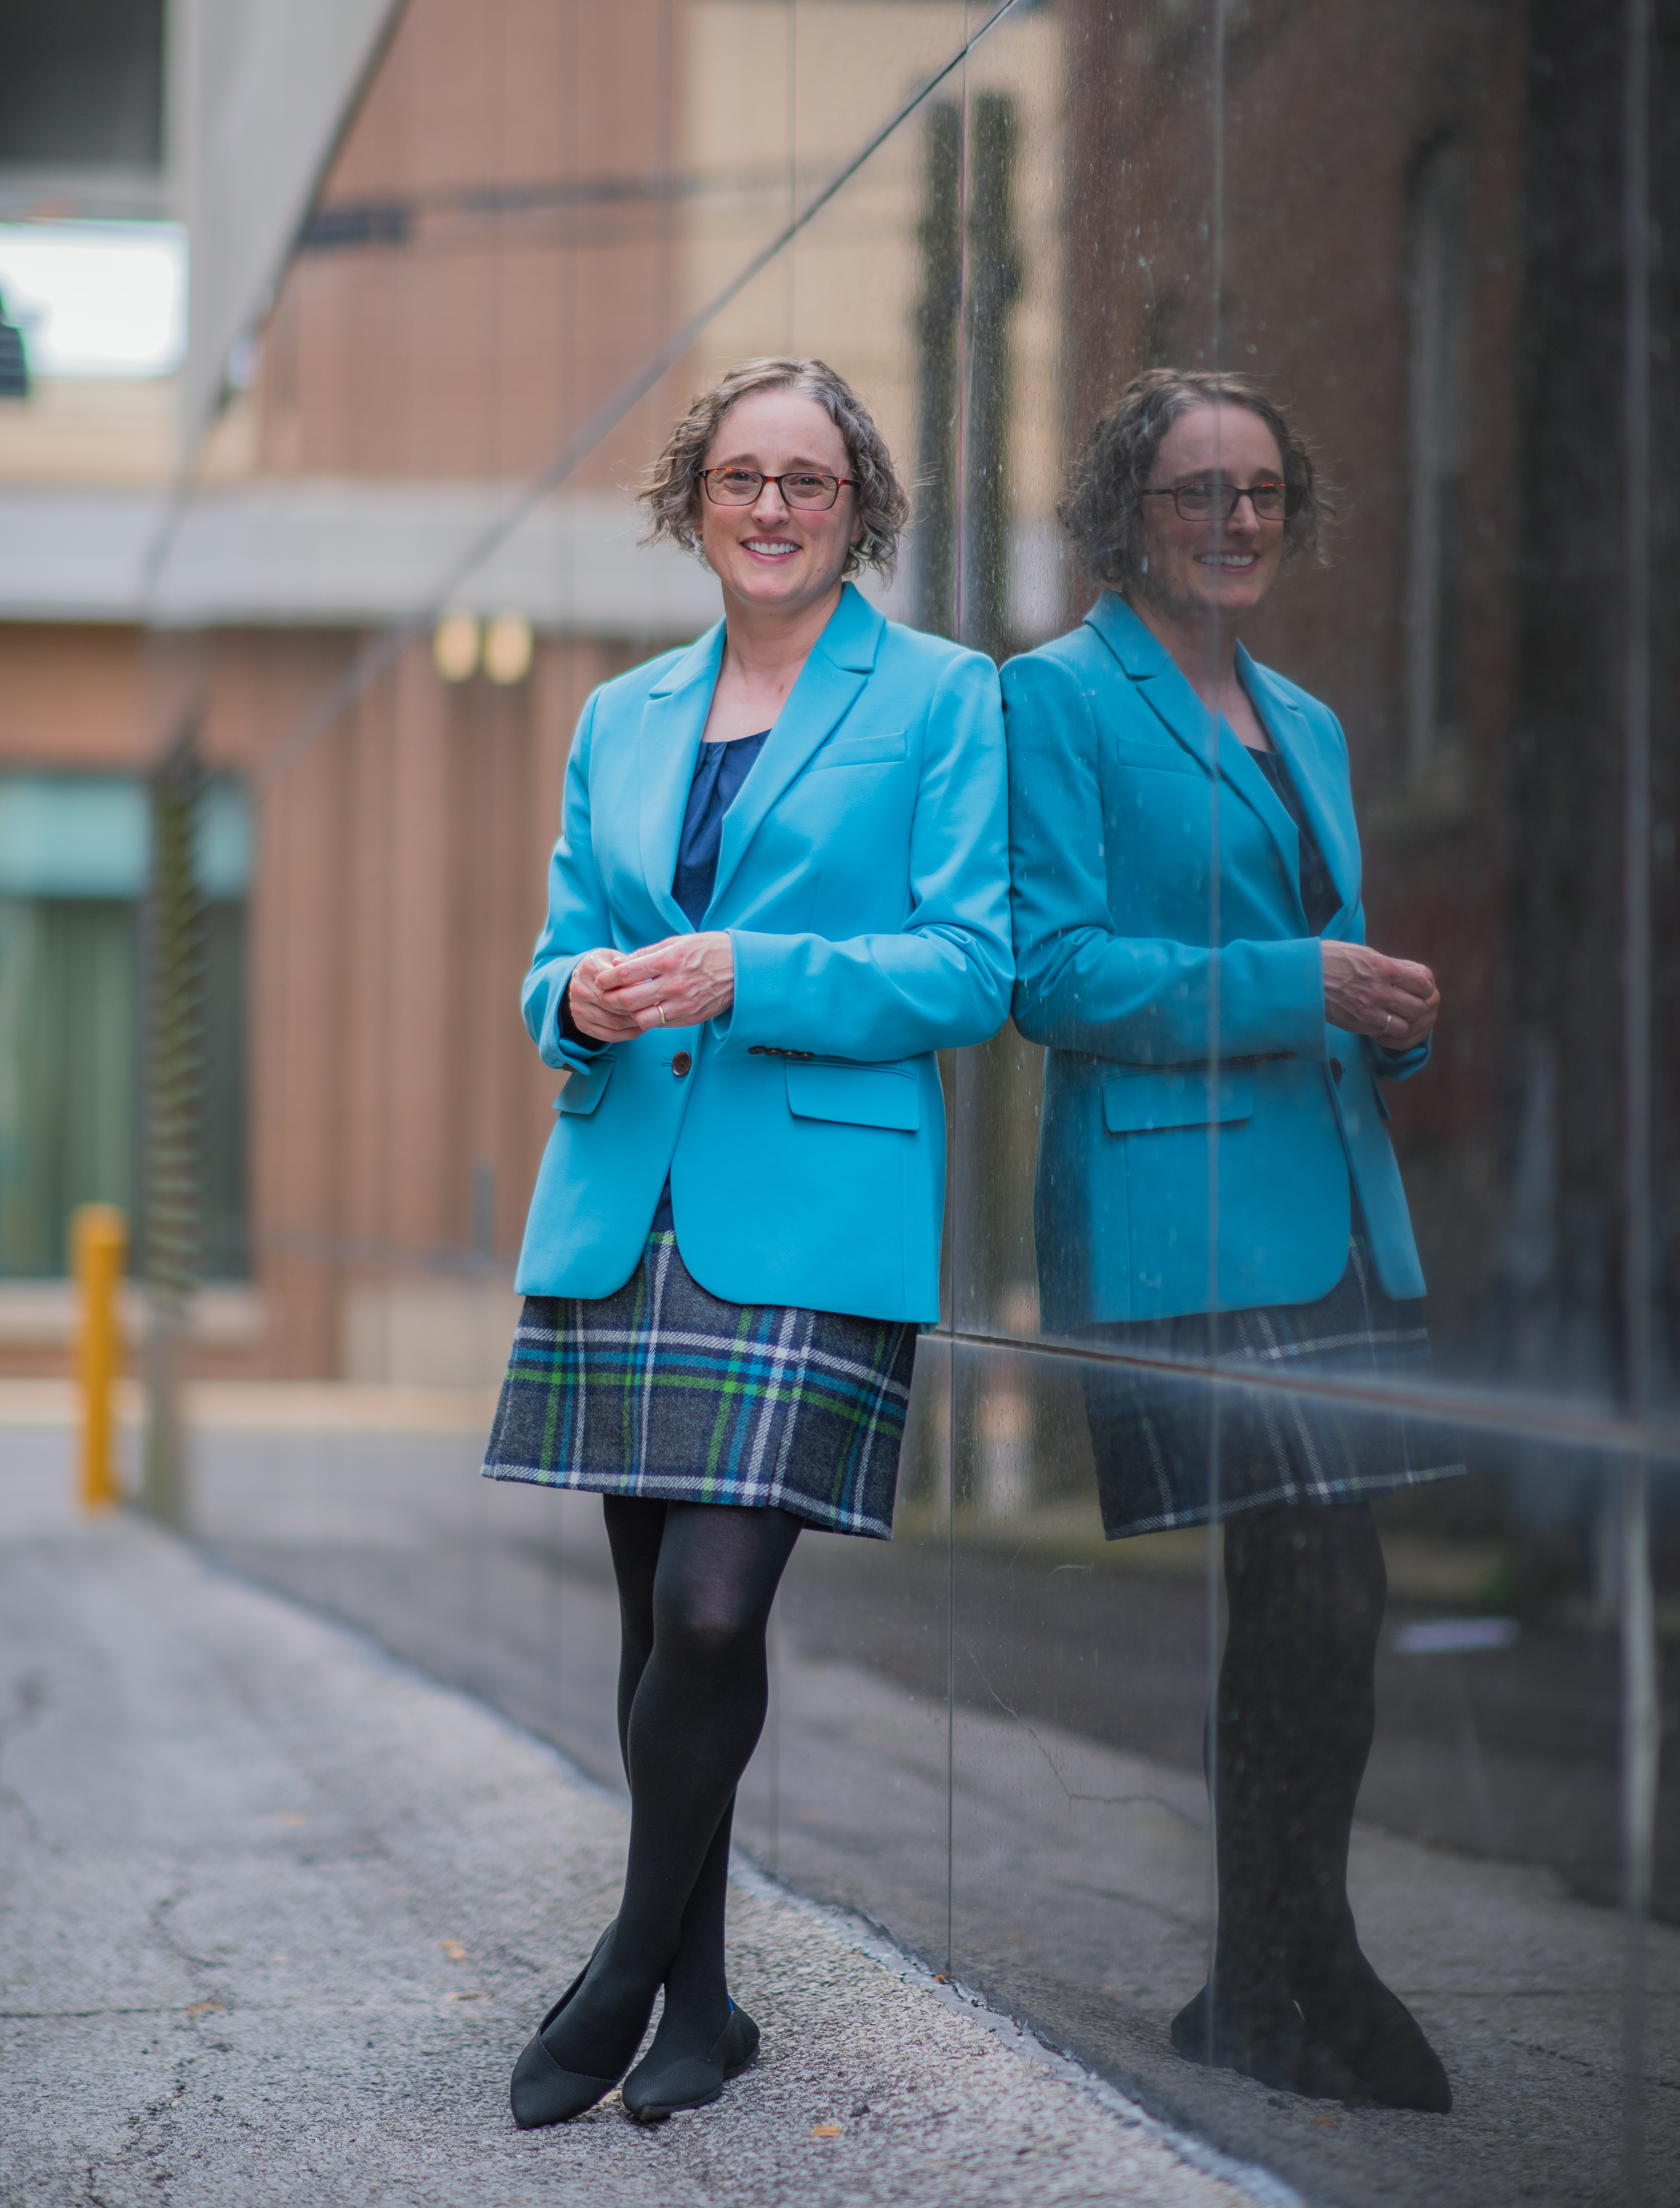 Image of a person standing outside in an alley. Person is wearing a blazer and tweed skirt. Person has wavy hair and is wearing glasses. Person is smiling.